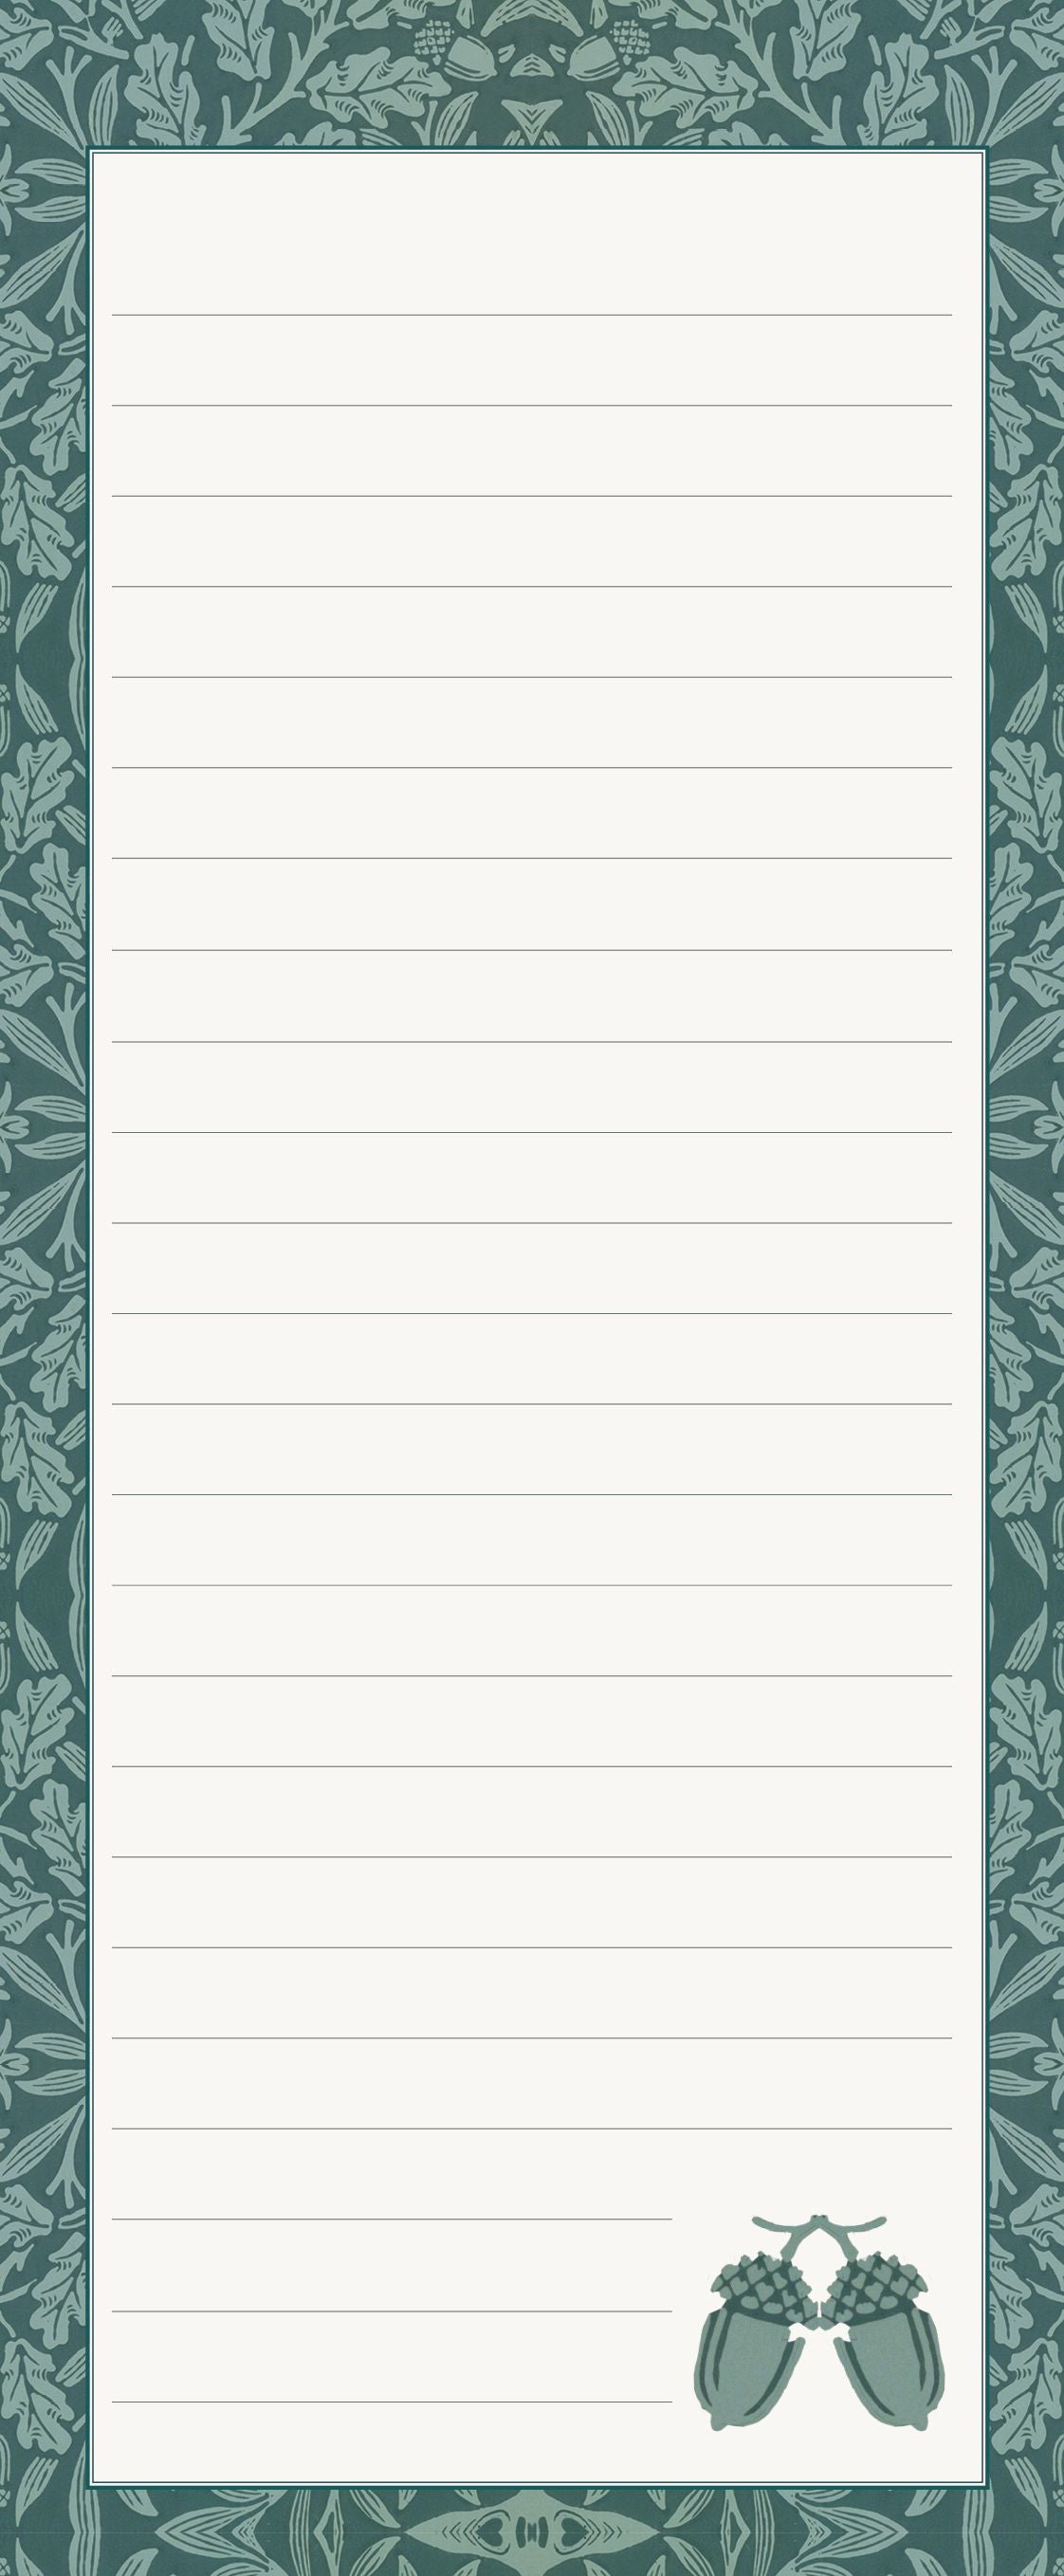 Gifted Stationery William Morris Magnetic Shopping List